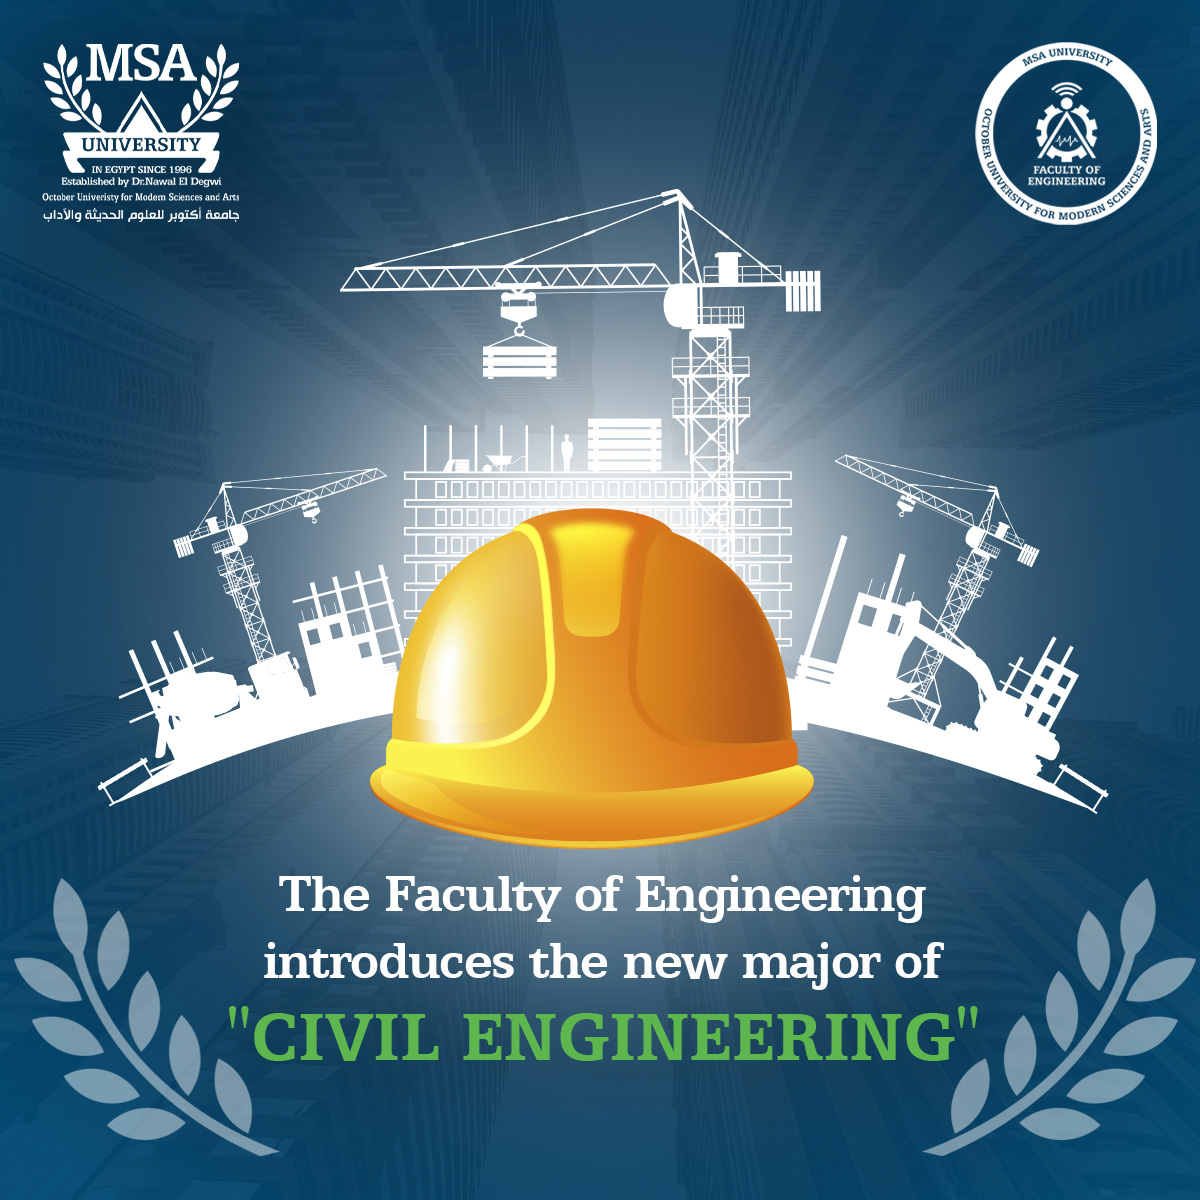 the-faculty-of-engineering-introduces-the-new-major-of-civil-engineering-202309041011